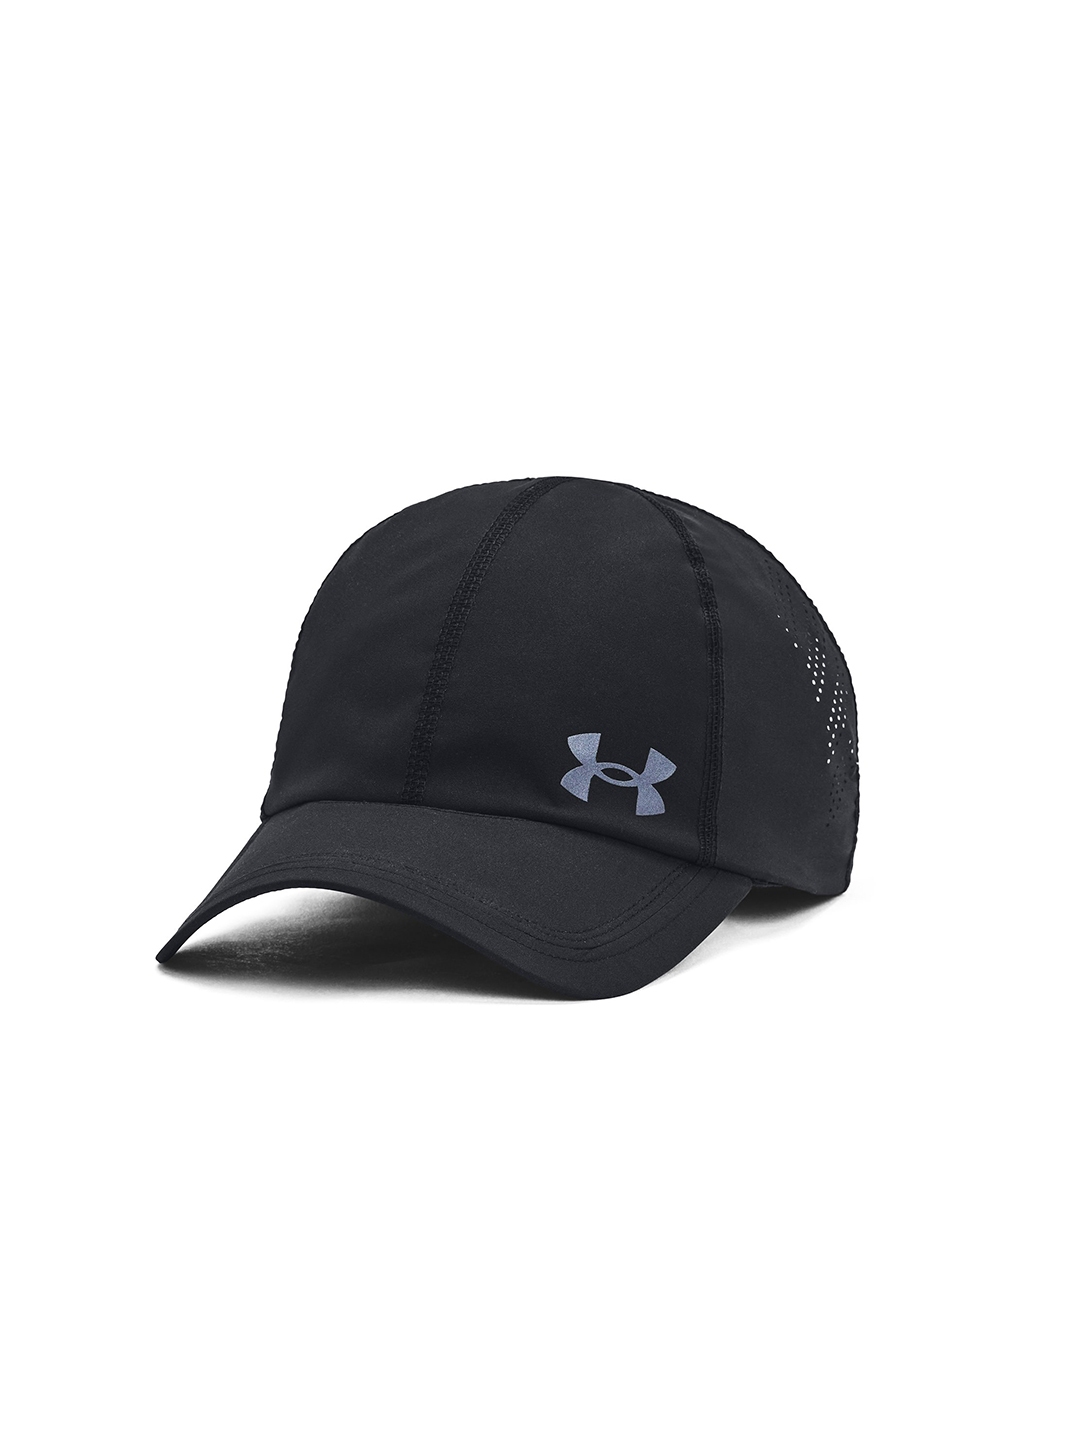 UNDER ARMOUR Men UA Branded Hat (Onesize) by Myntra